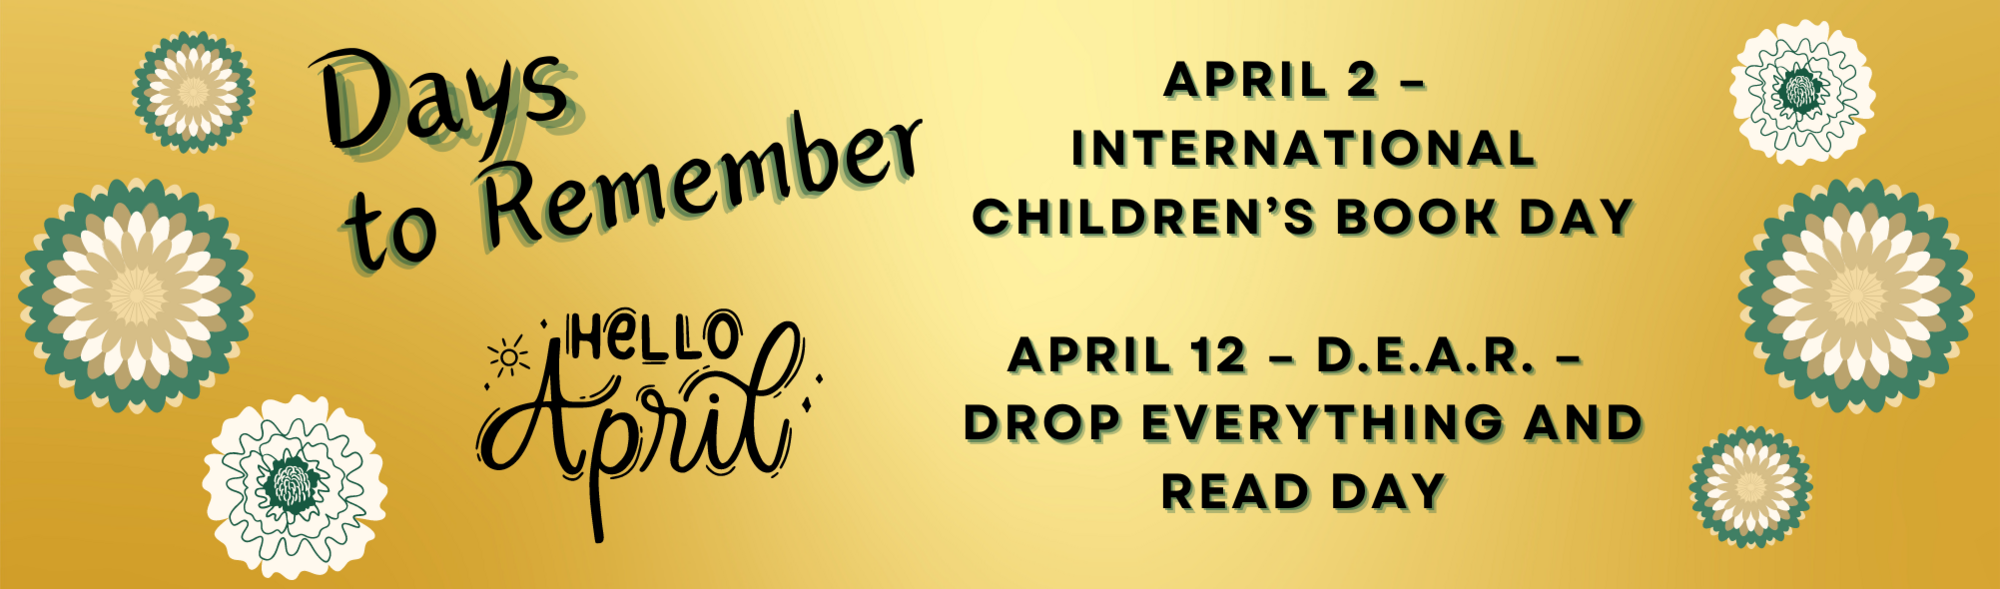 Days to Remember April 2 - International Children's Book Day  April 12 D.E.A.R. - Drop Everything and Read Day